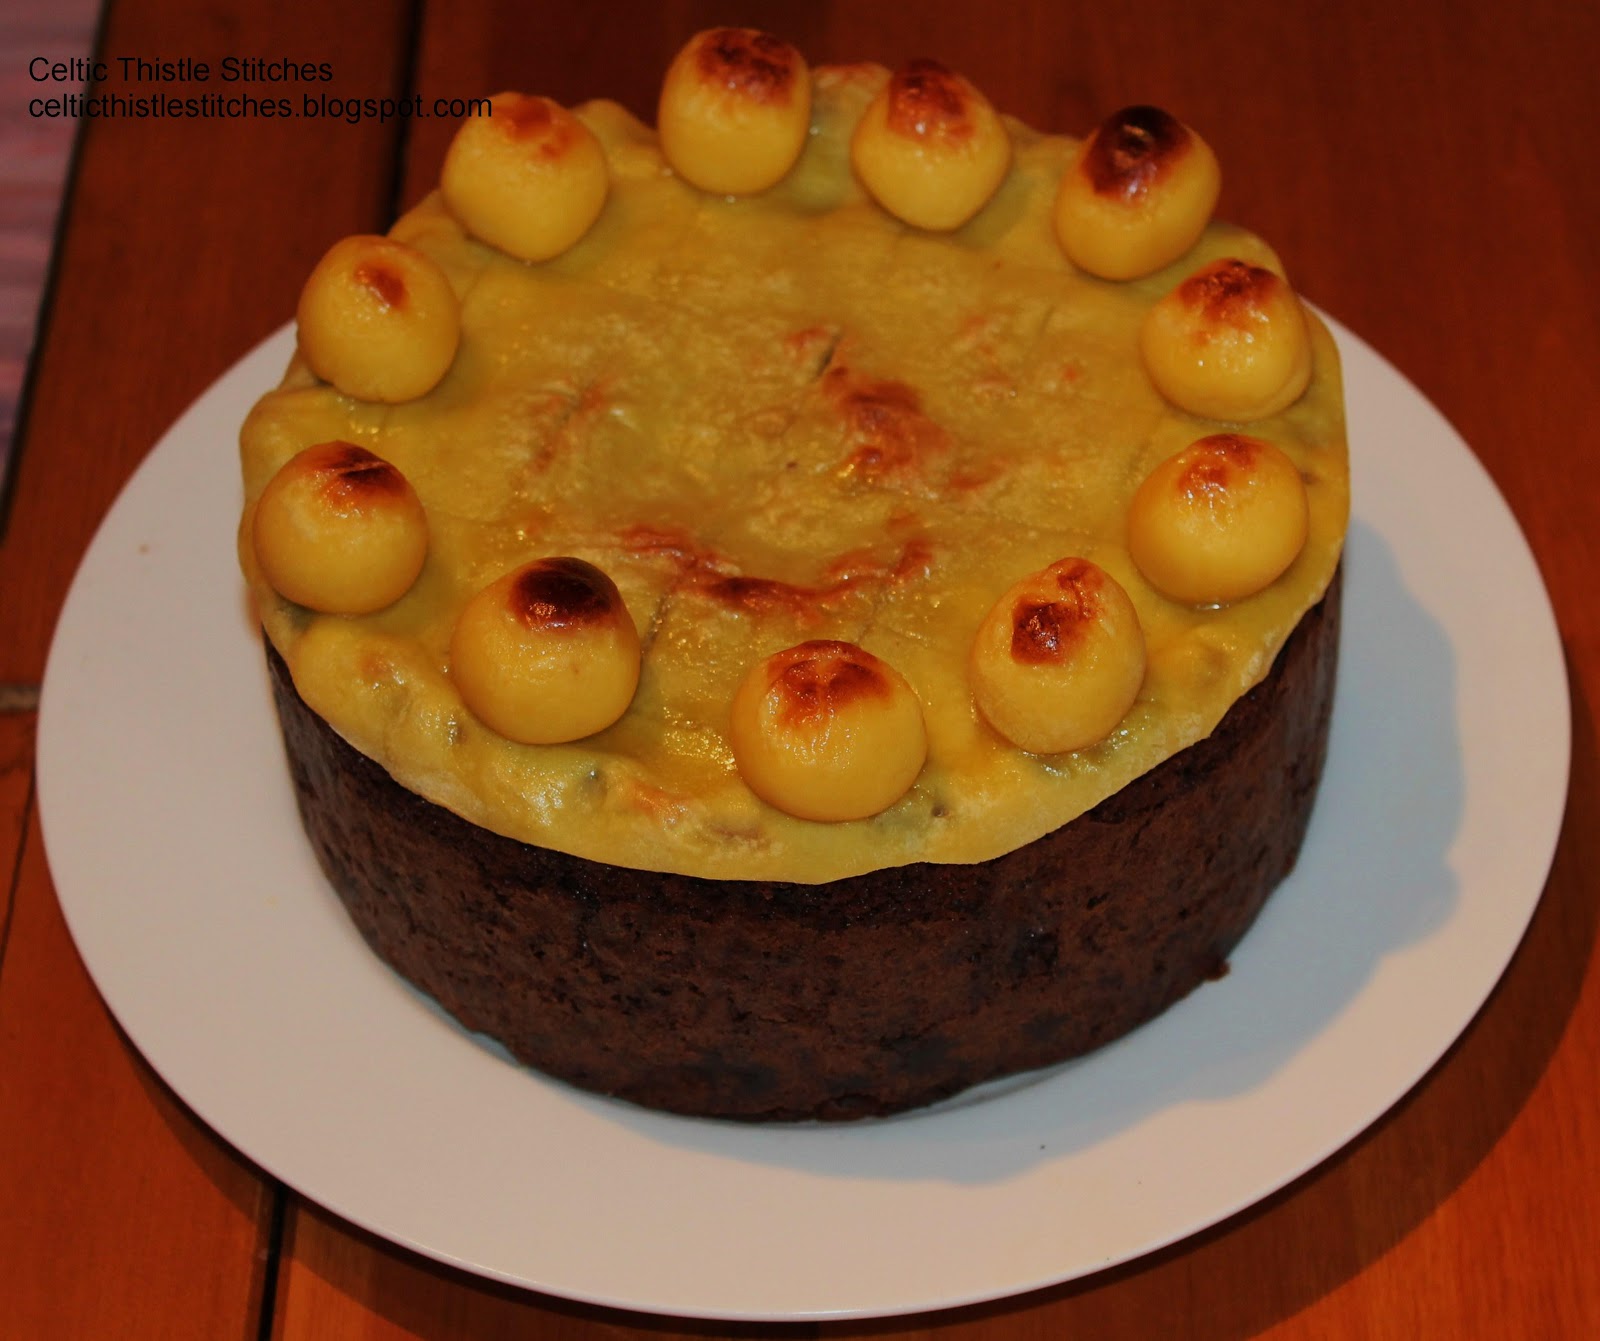 fruit cake with marzipan topping and eleven marzipan balls to represent the disciples minus Judas. Traditionally made for Easter